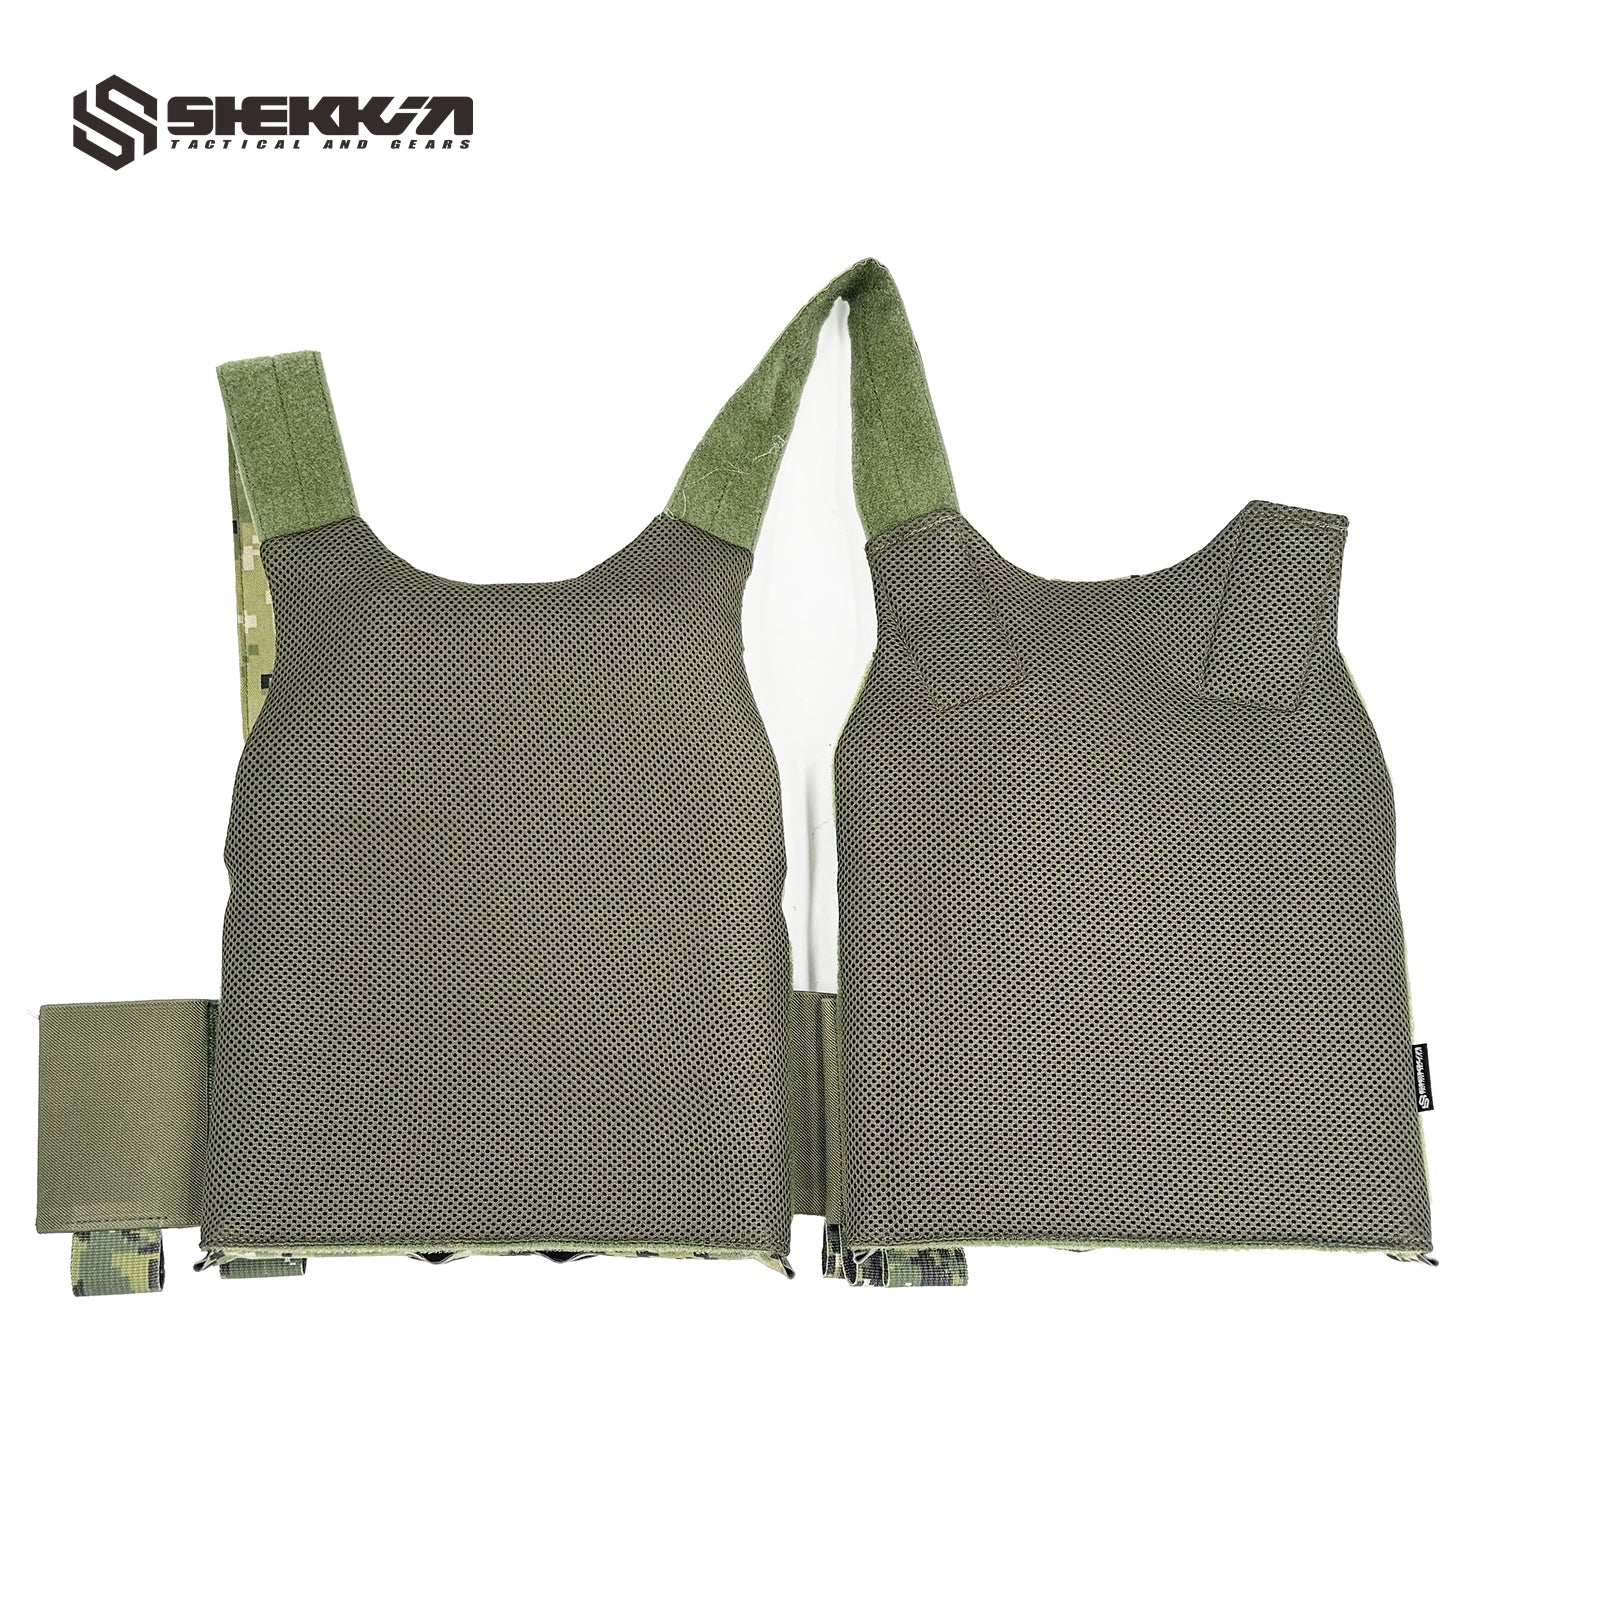 AOR2 The Slickster style plate carrier